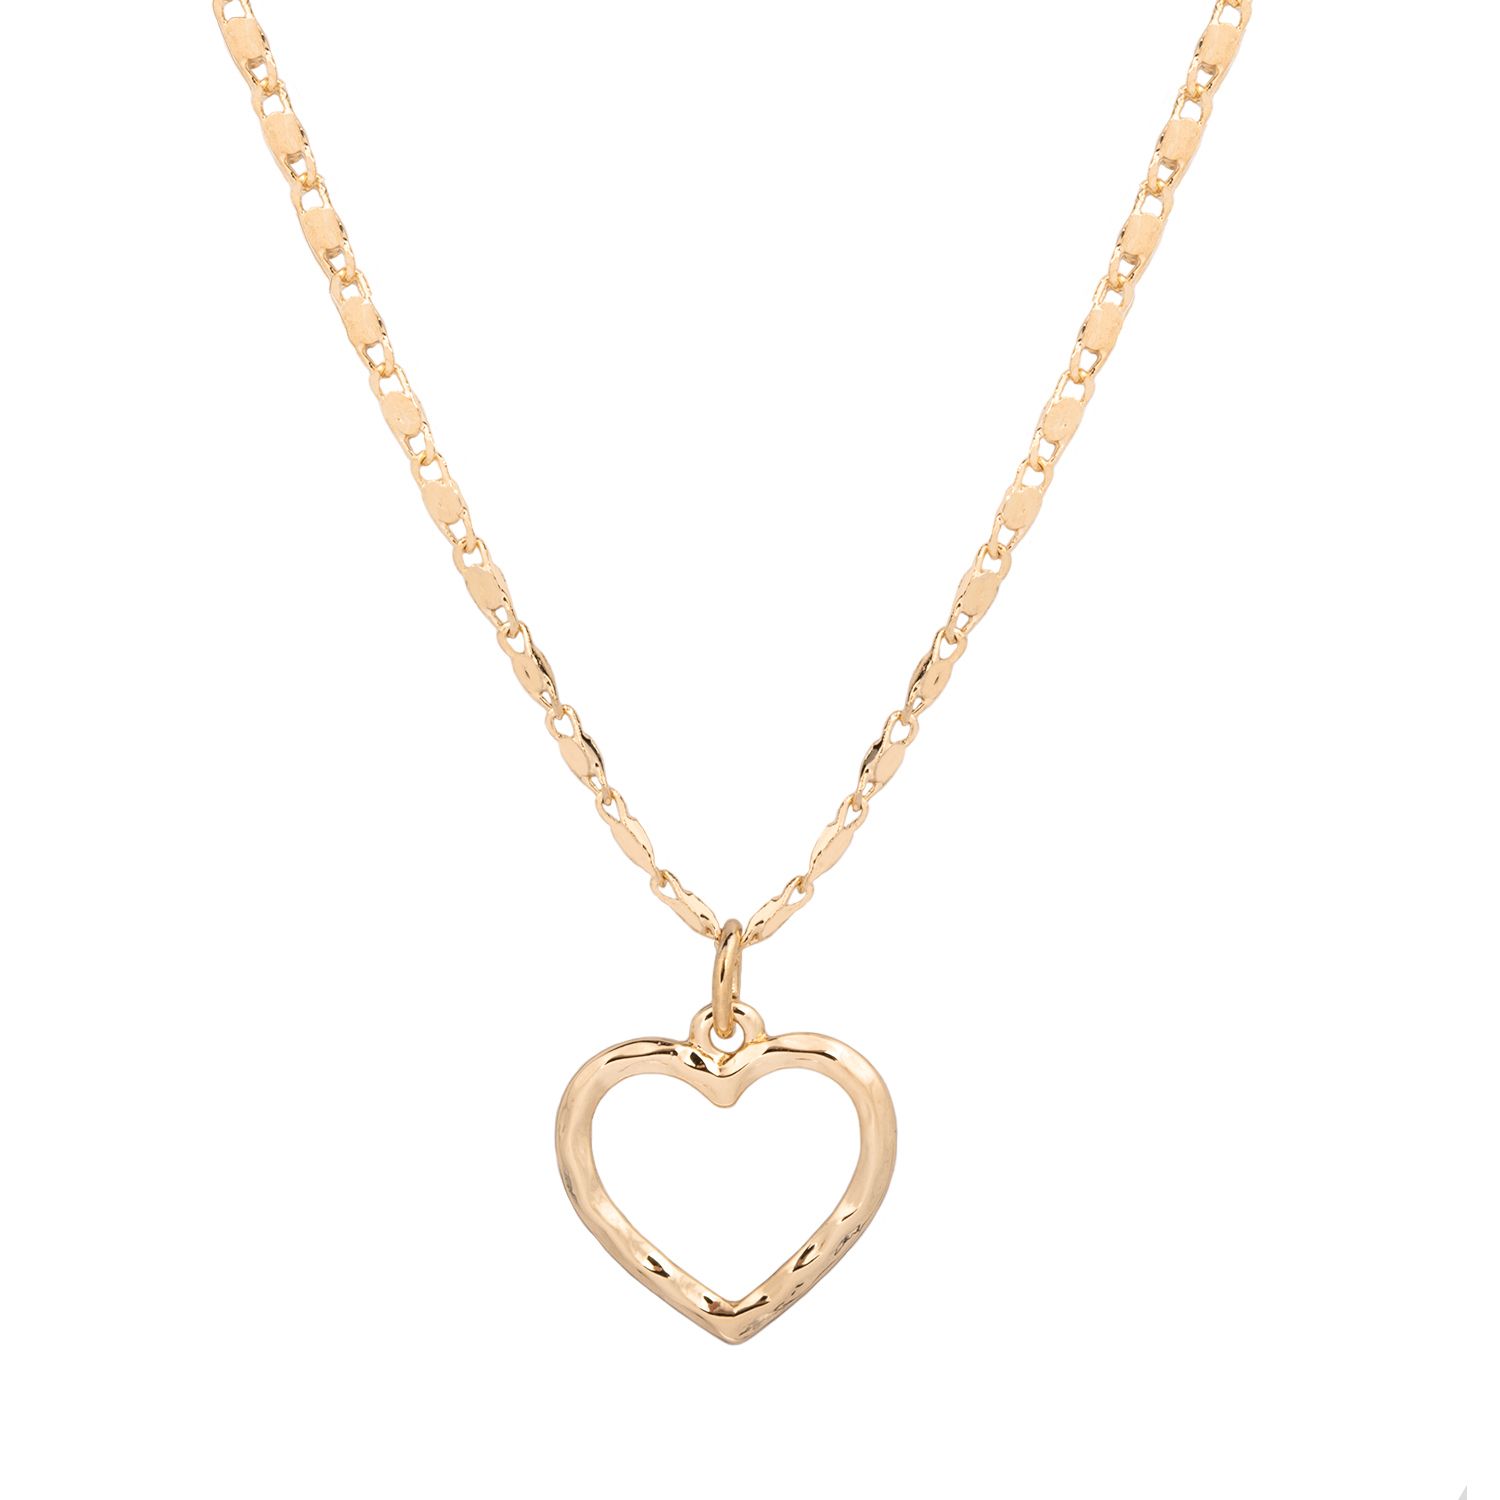 Image for LC Lauren Conrad Gold Tone Textured Heart Pendant Necklace at Kohl's.